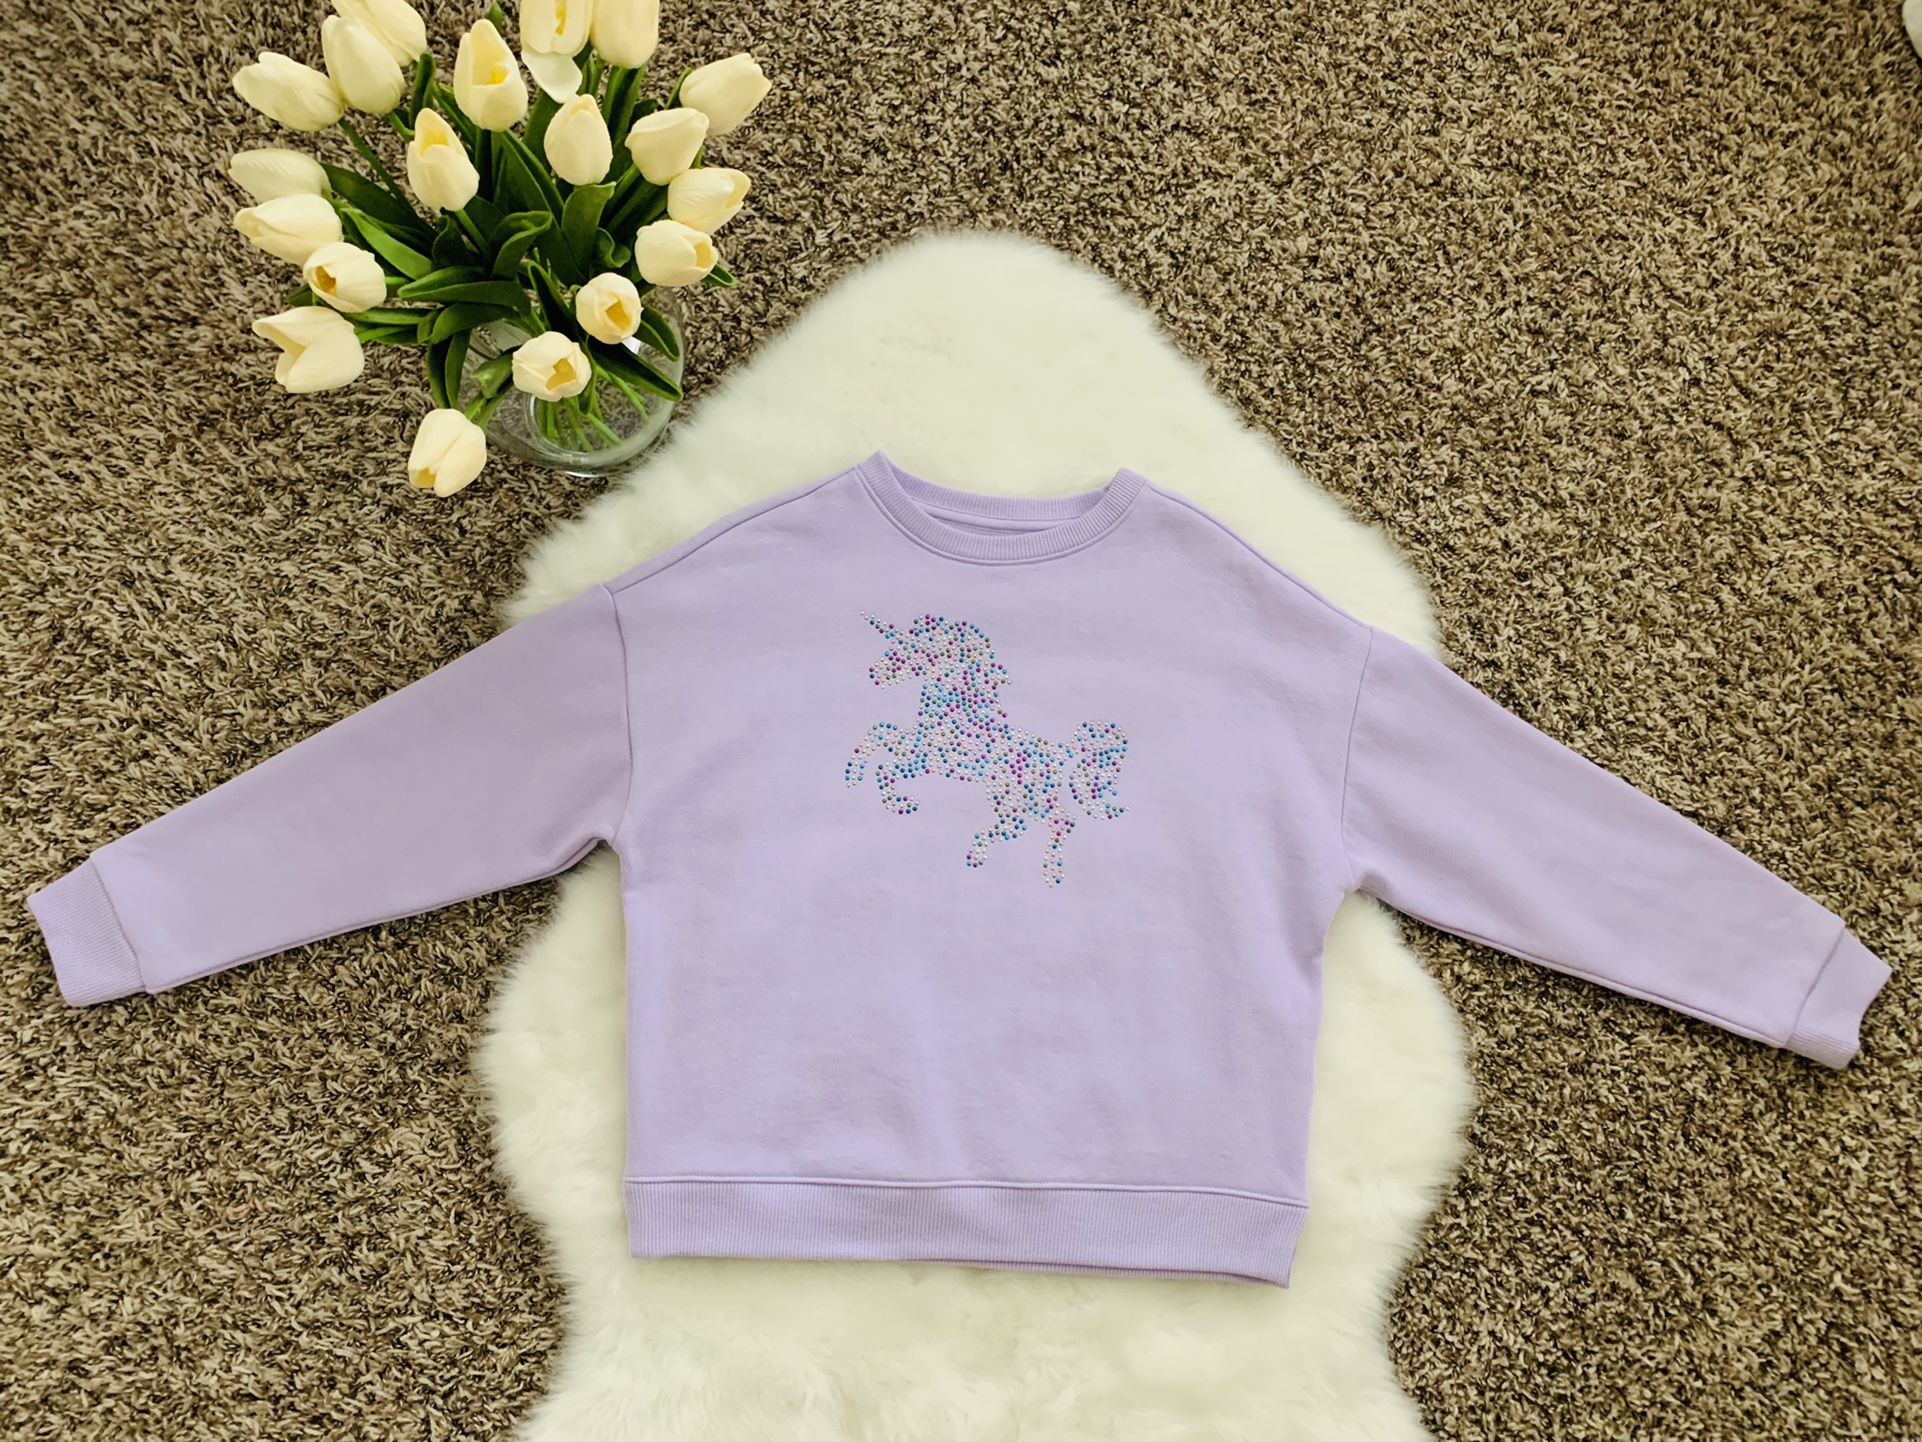 Sweater for girls, color purple, size 7-8 years .